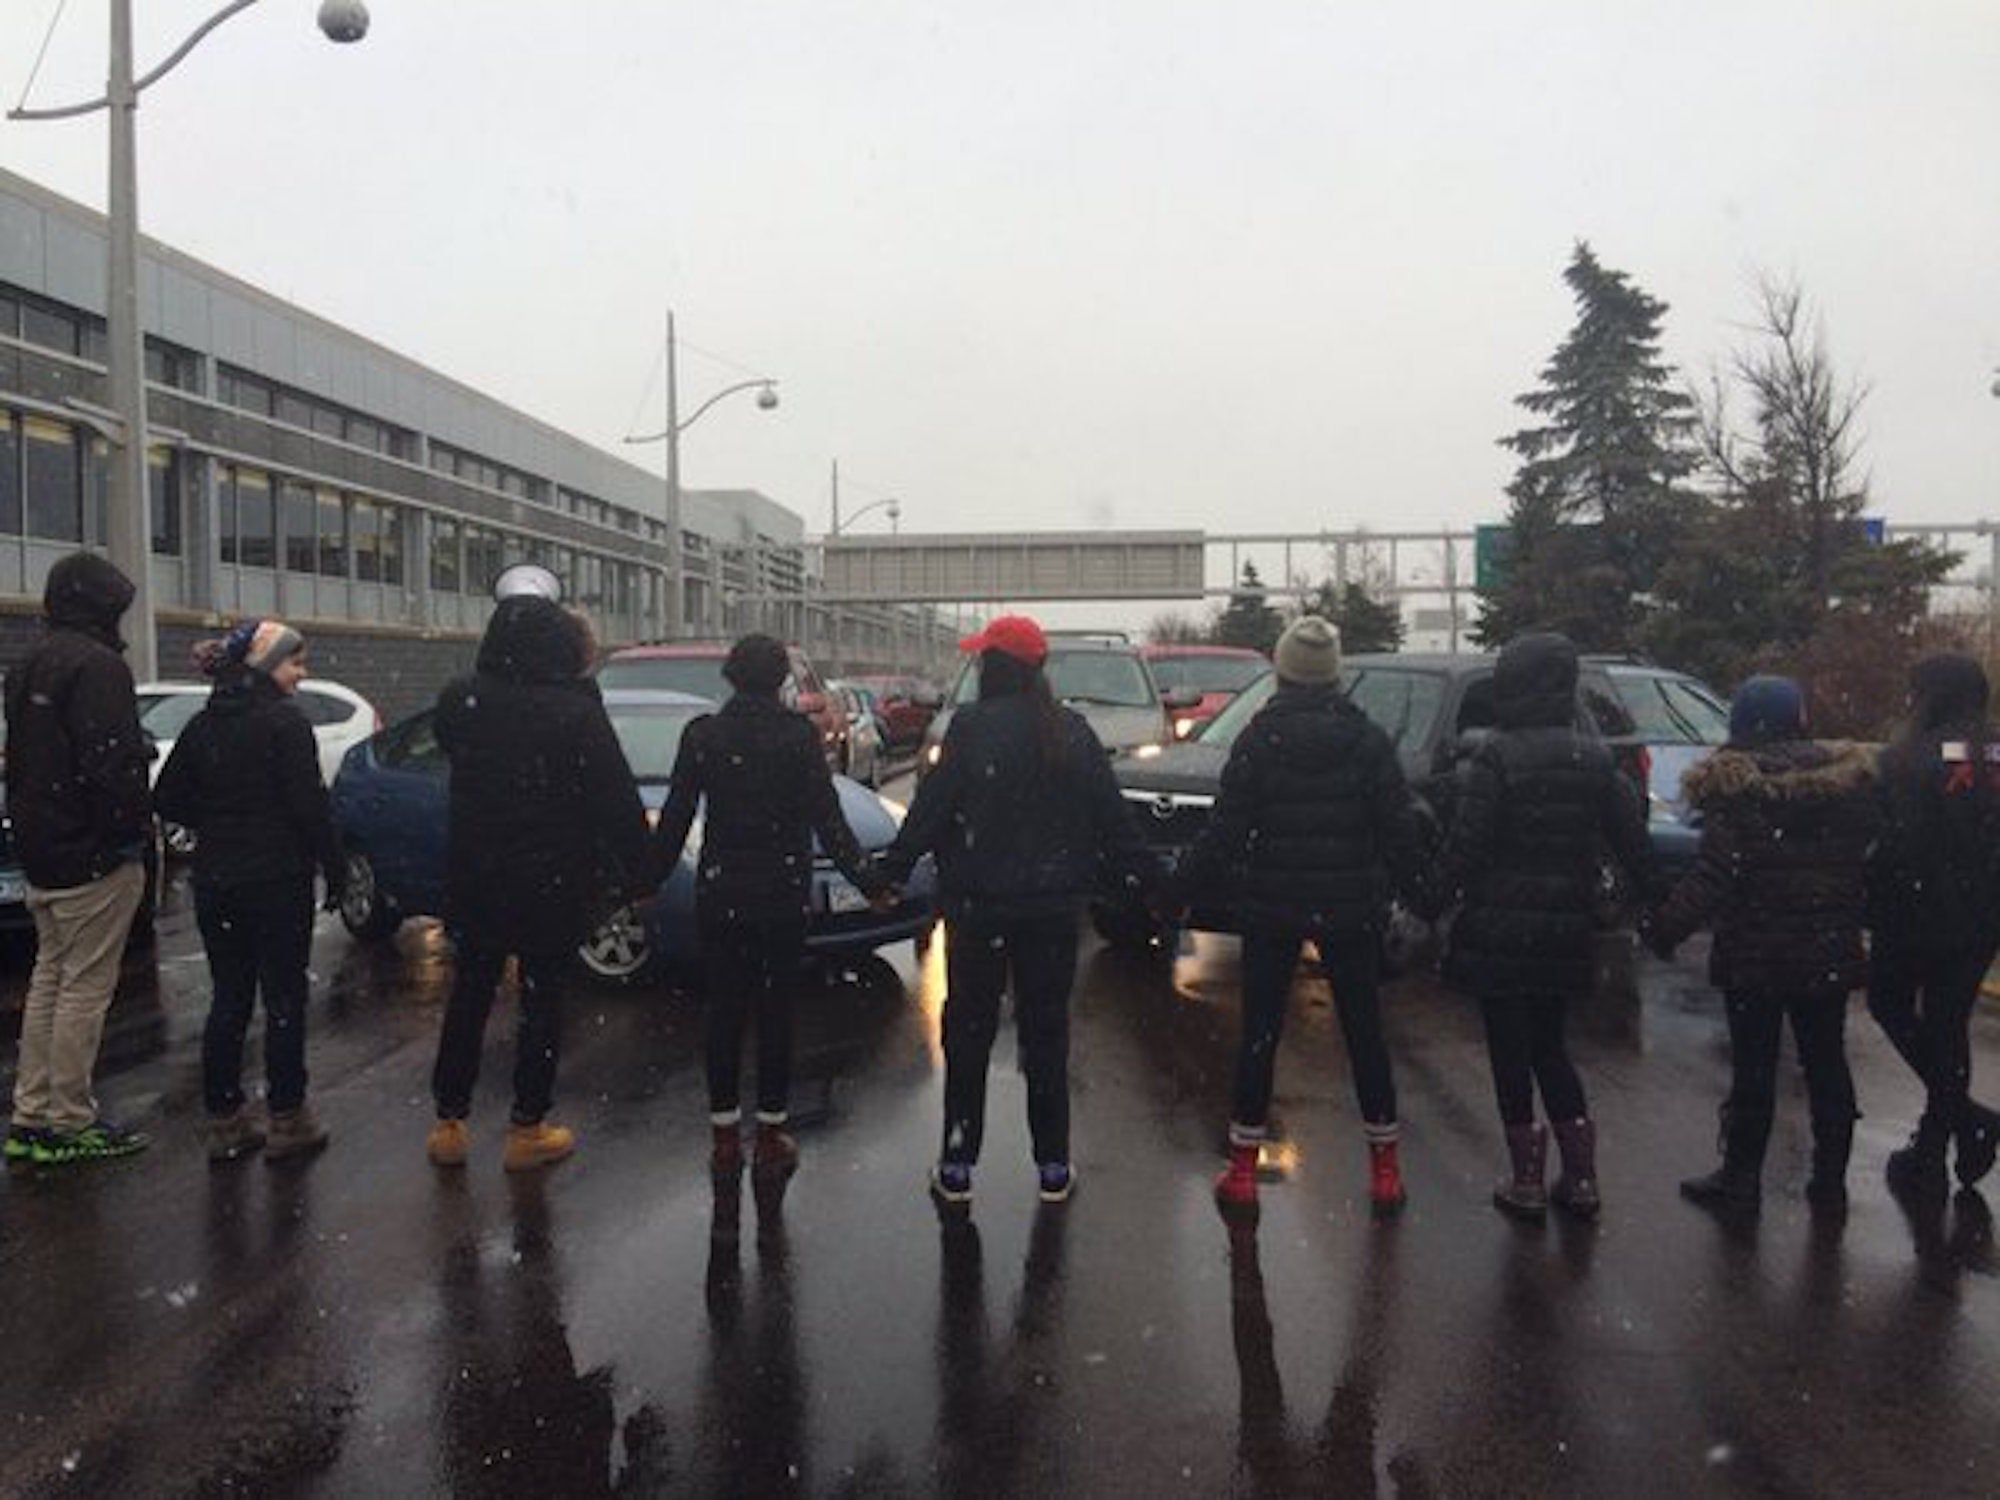 Black Lives Matter protestors reportedly left the Mall of America and attempted to shut down the Minneapolis-St Paul Airport Wednesday.